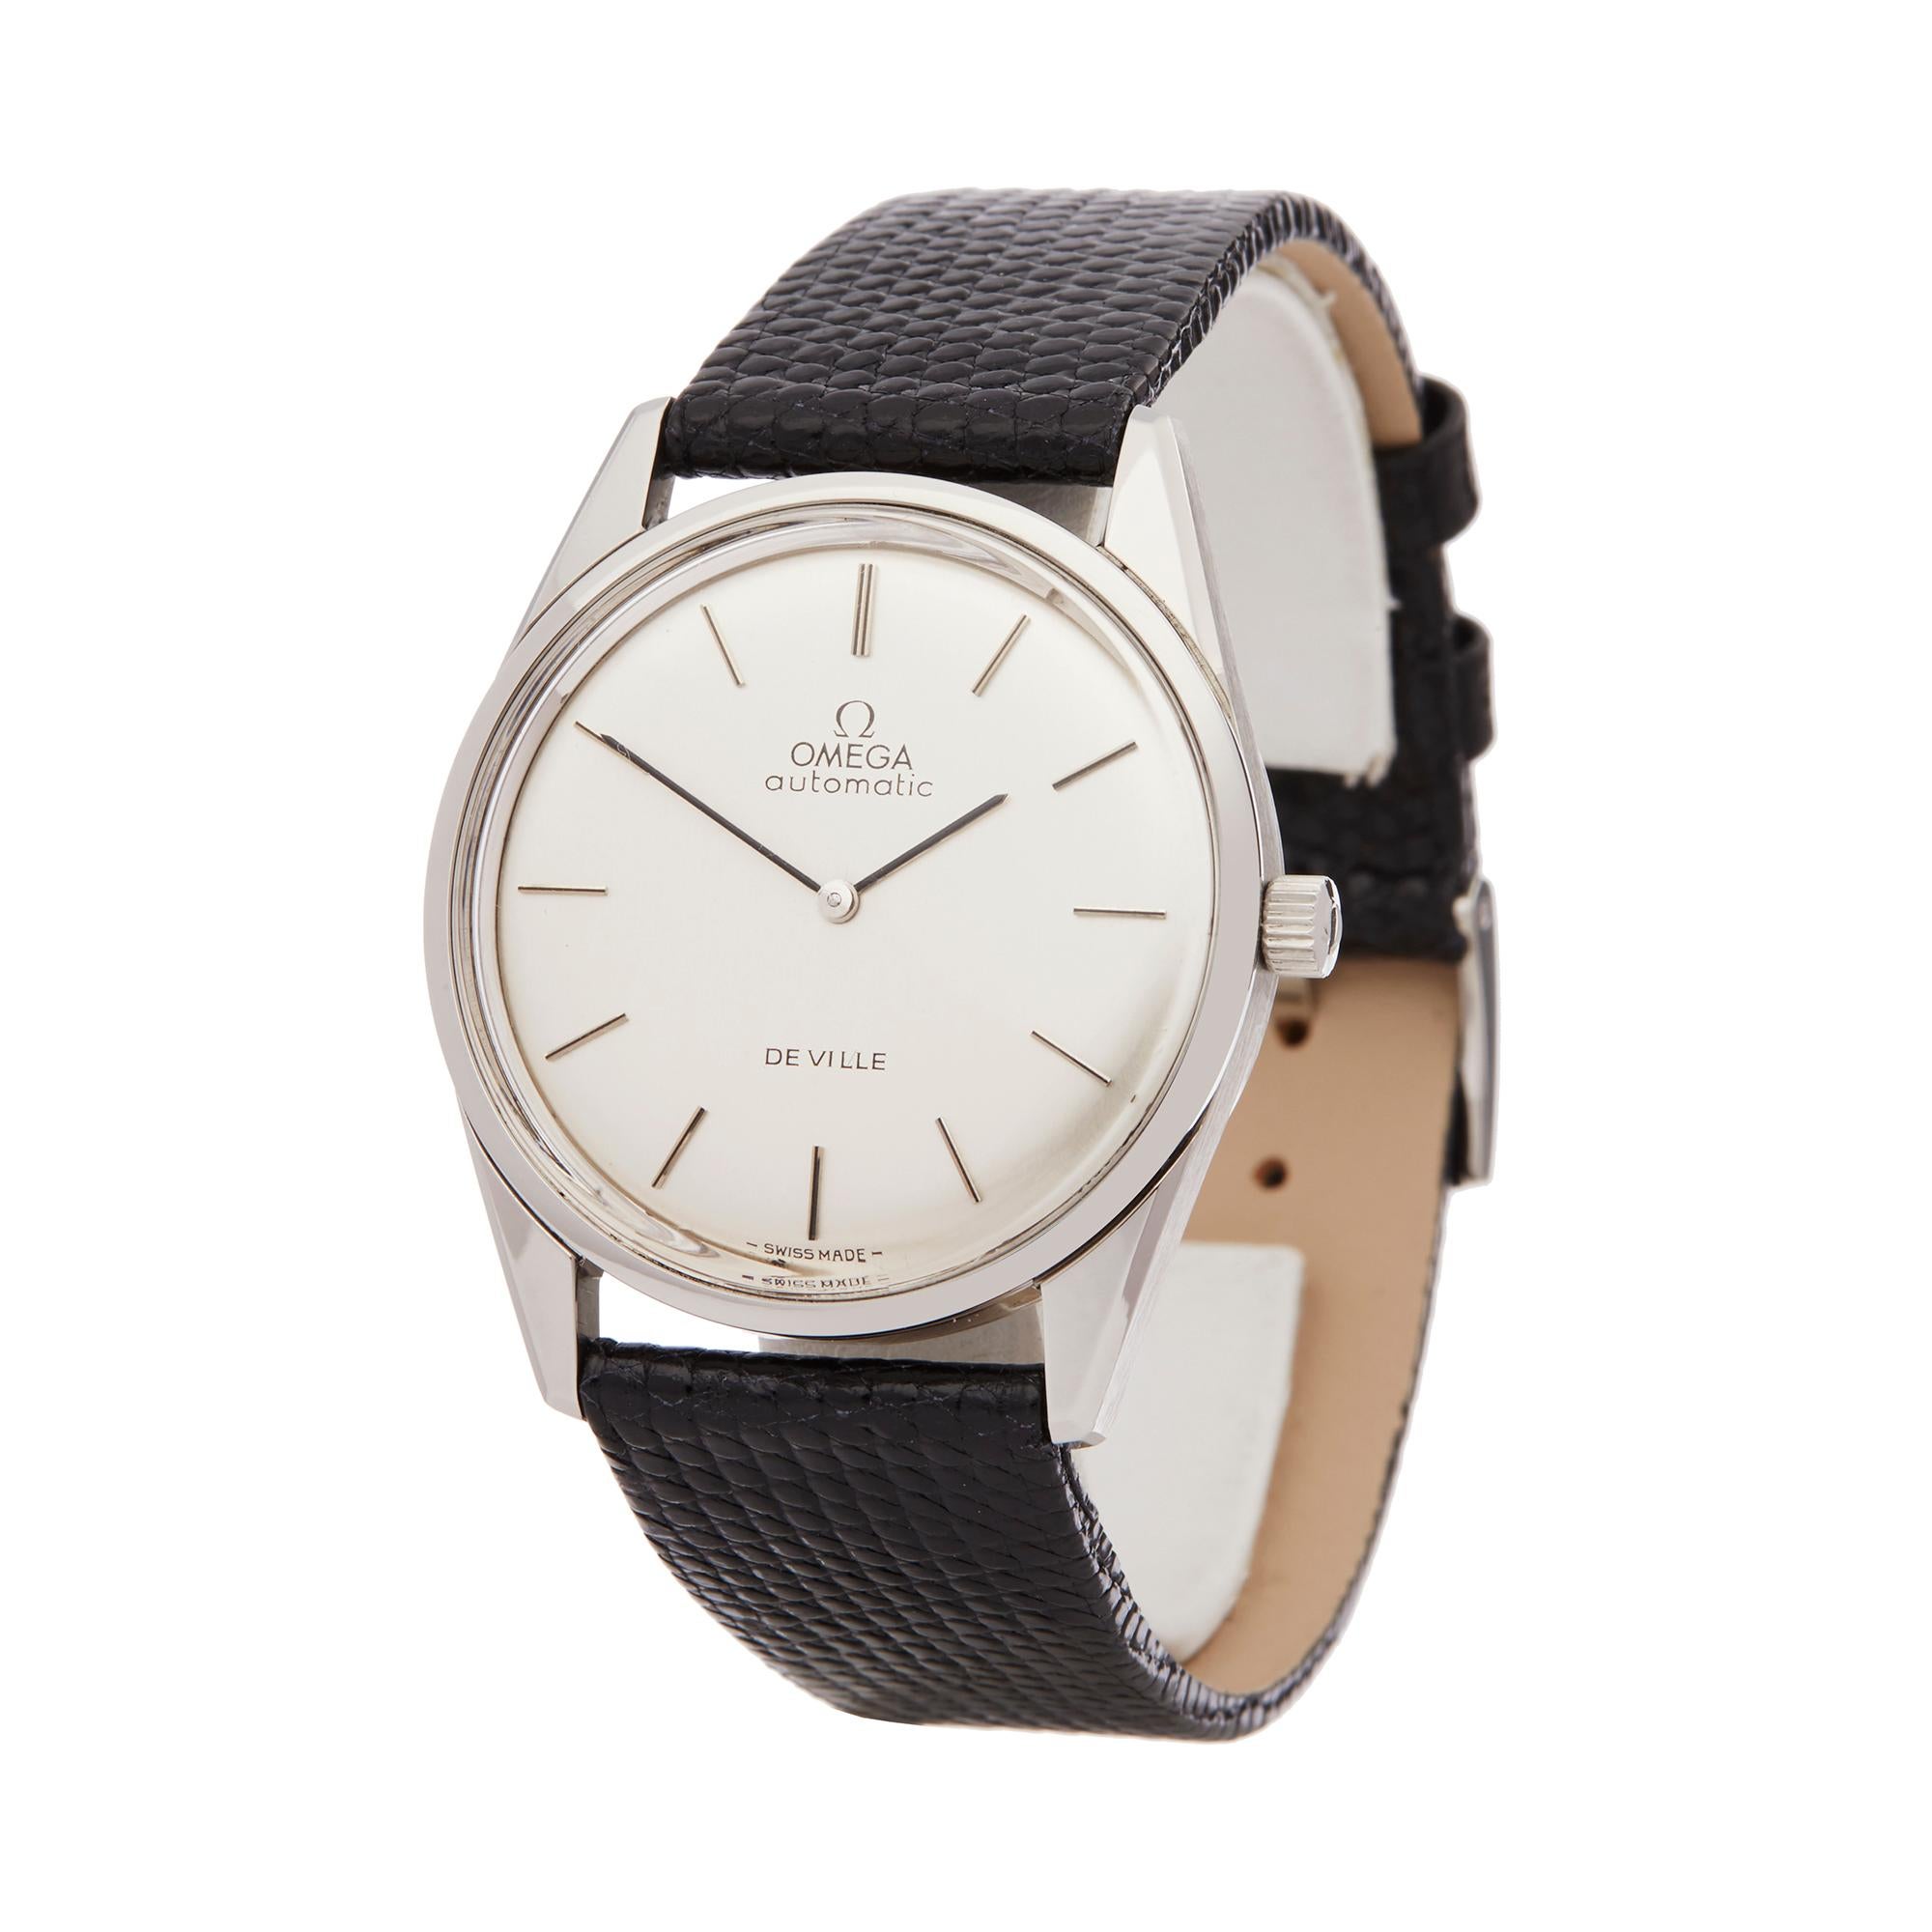 Reference: COM2130
Manufacturer: Omega
Model: De Ville
Model Reference: 1550019
Age: Circa 1973
Gender: Men's
Box and Papers: Original Omega Box Only
Dial: Silver Baton
Glass: Plexiglass
Movement: Automatic
Water Resistance: To Manufacturers